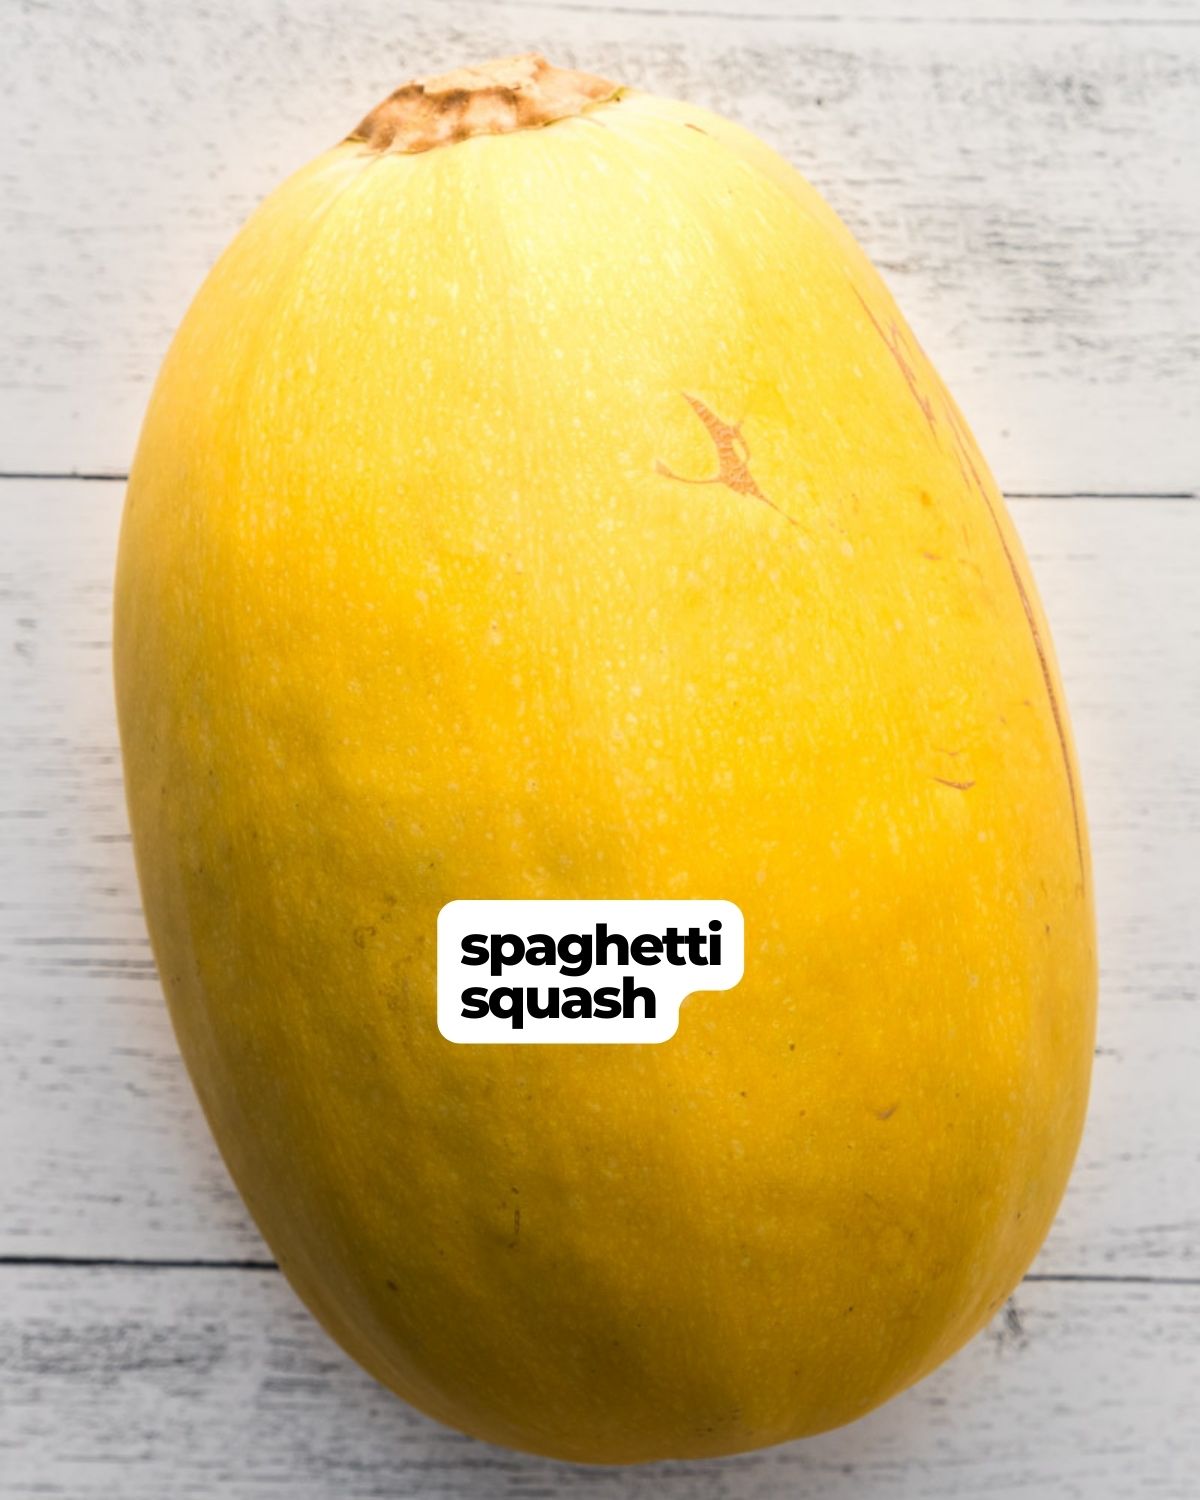 Just a whole uncooked spaghetti squash labeled as the ingredient